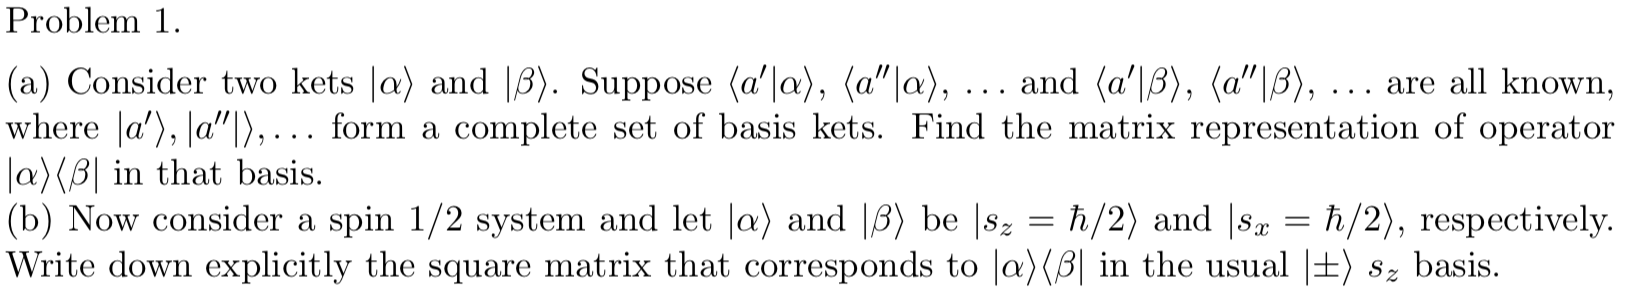 Problem 1
|(a) Consider two kets |a) and |3). Suppose (a'|a), (a"|a), .. . and (a'|B), (a"|B), ...
where a'), a"|),... form a
Ja)(B| in that basis
|(b) Now consider a spin 1/2 system and let |a) and |B) be |8
|Write down explicitly the square matrix that corresponds to |a)(B| in the usual |±) 8z basis.
are all known,
complete set of basis kets. Find the matrix representation of operator
h/2) and |sa
h/2), respectively.
